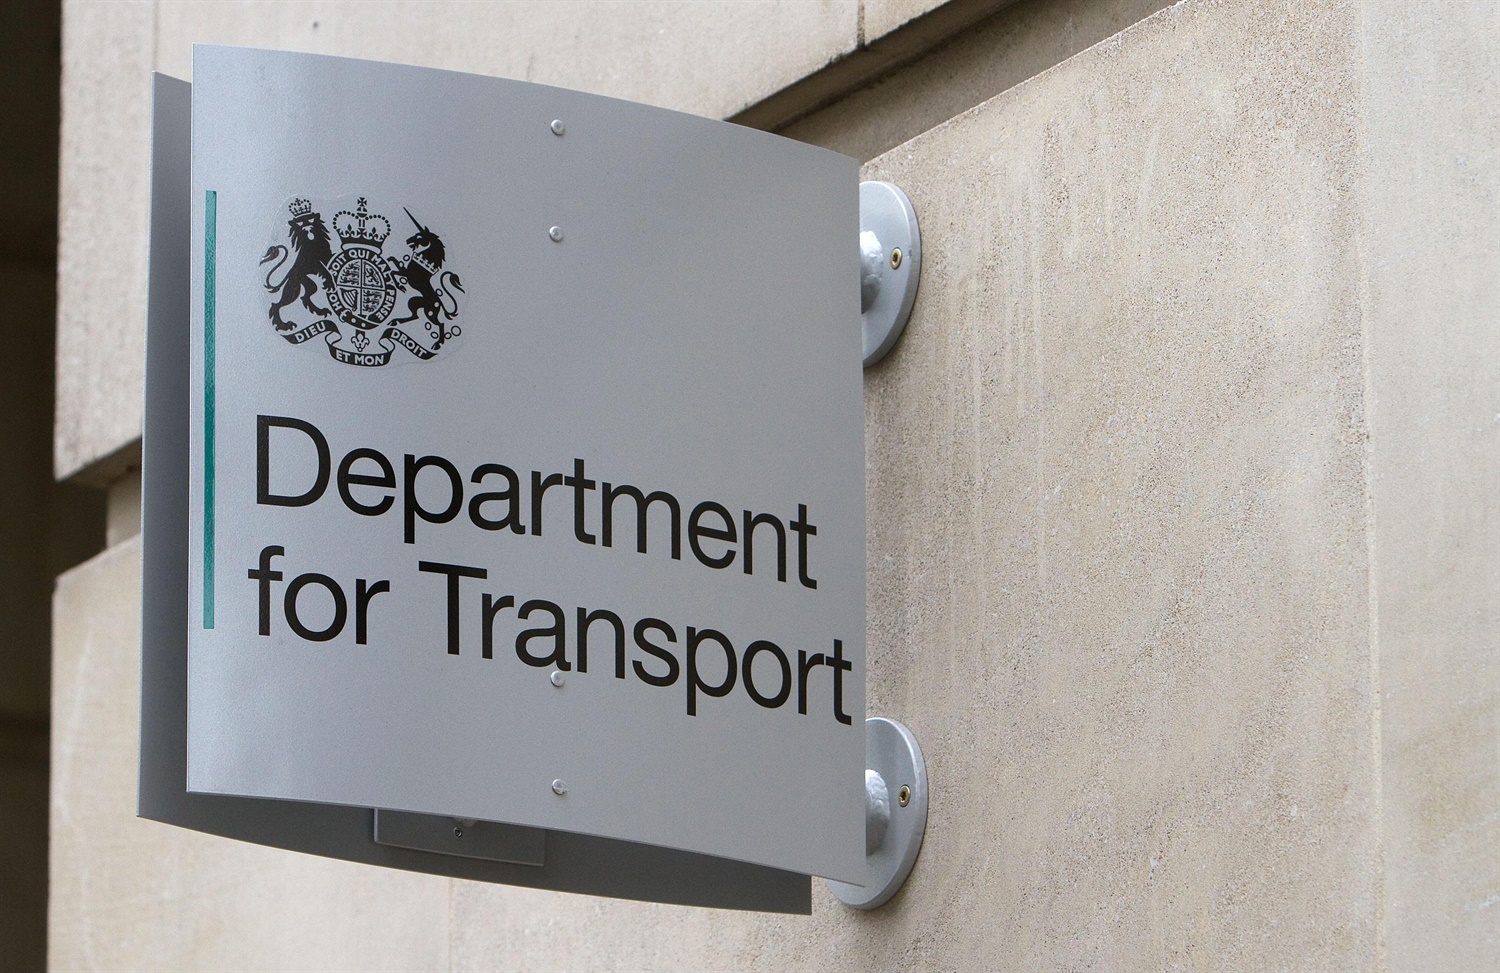 Director general of Rail Executive leaves for Defra